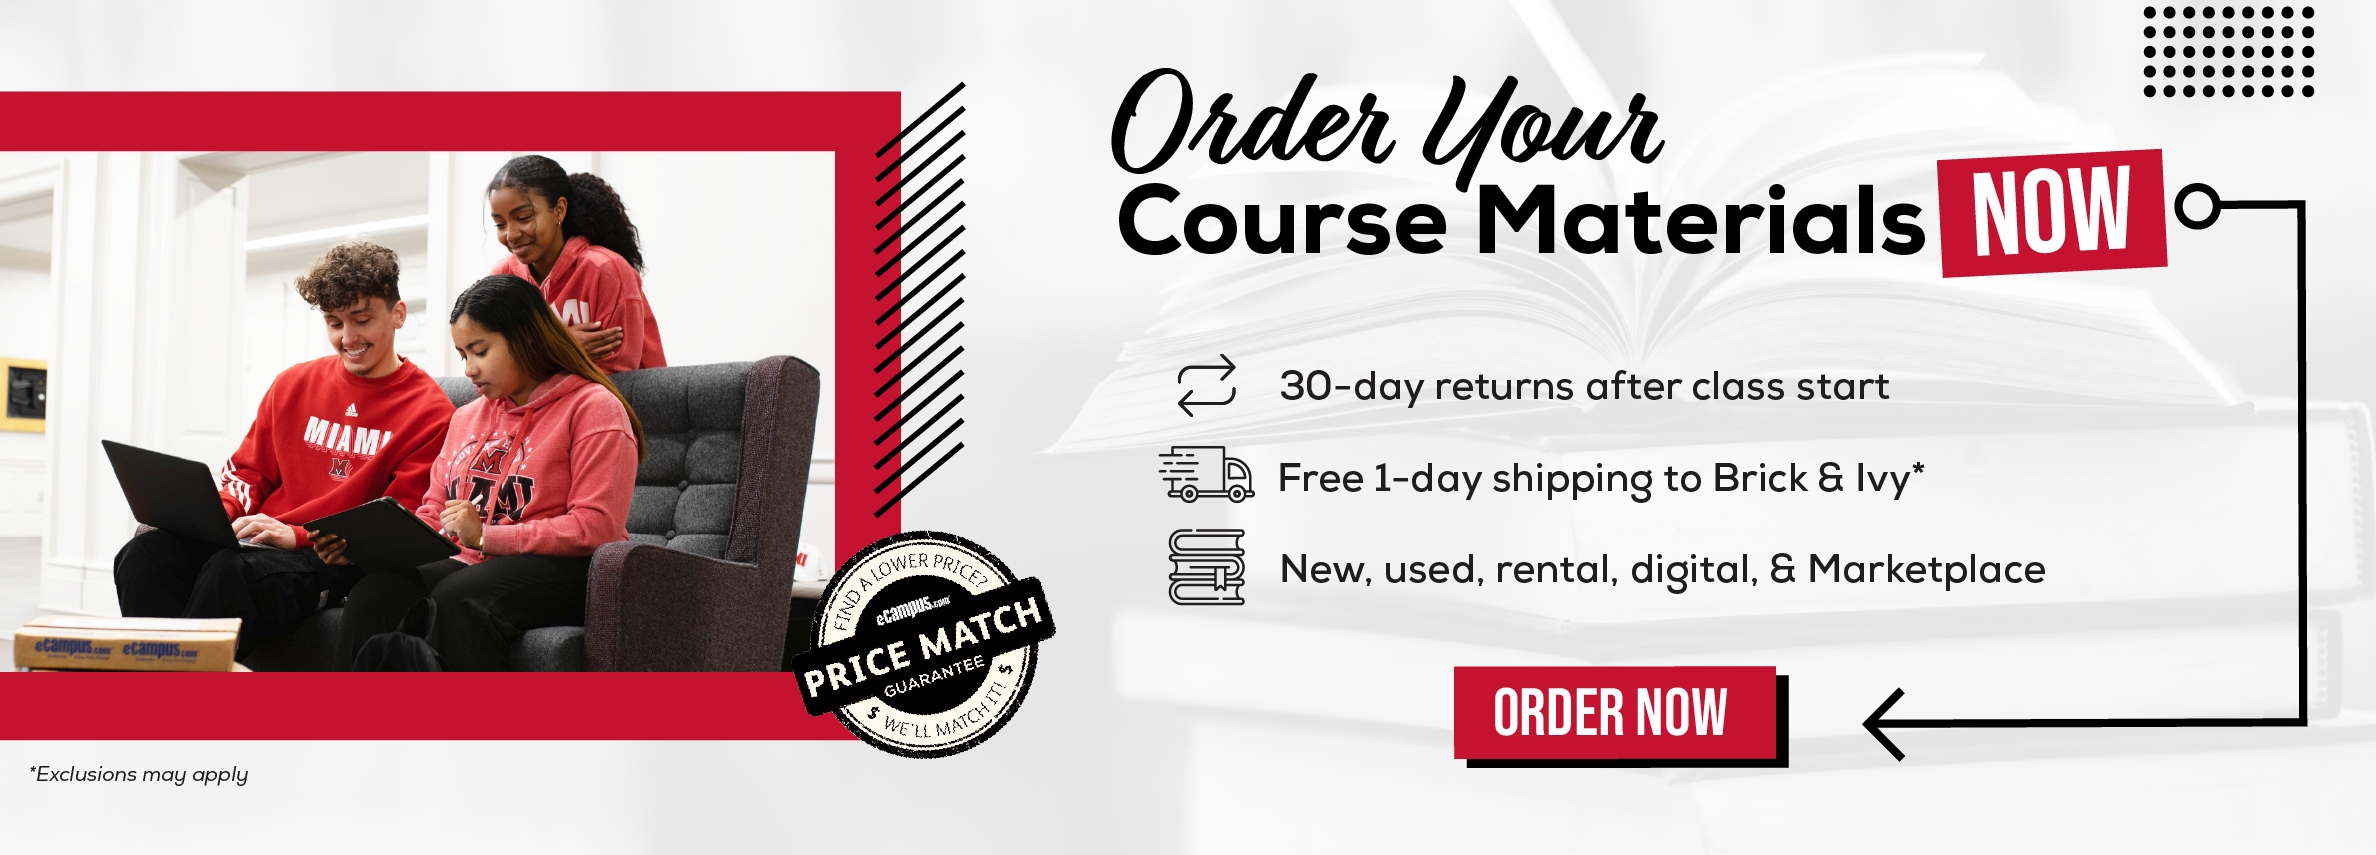 Order Your Course Materials Now. 30-day returns after class start. Free 1-day shipping to campus store*. New, used, rental, digital, & Marketplace. Order now. *Exclusions may apply.